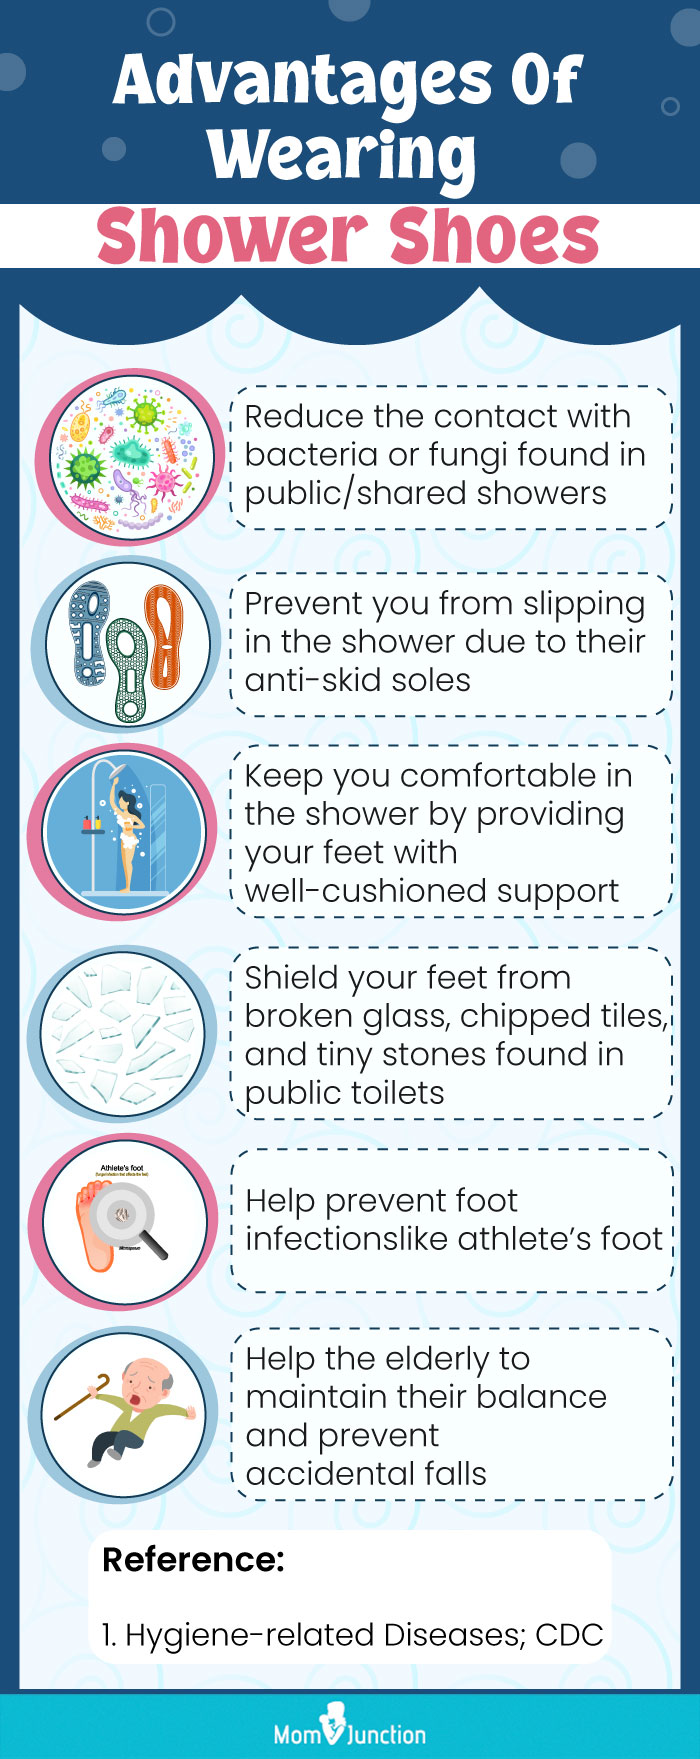 Advantages Of Wearing Shower Shoes (infographic)